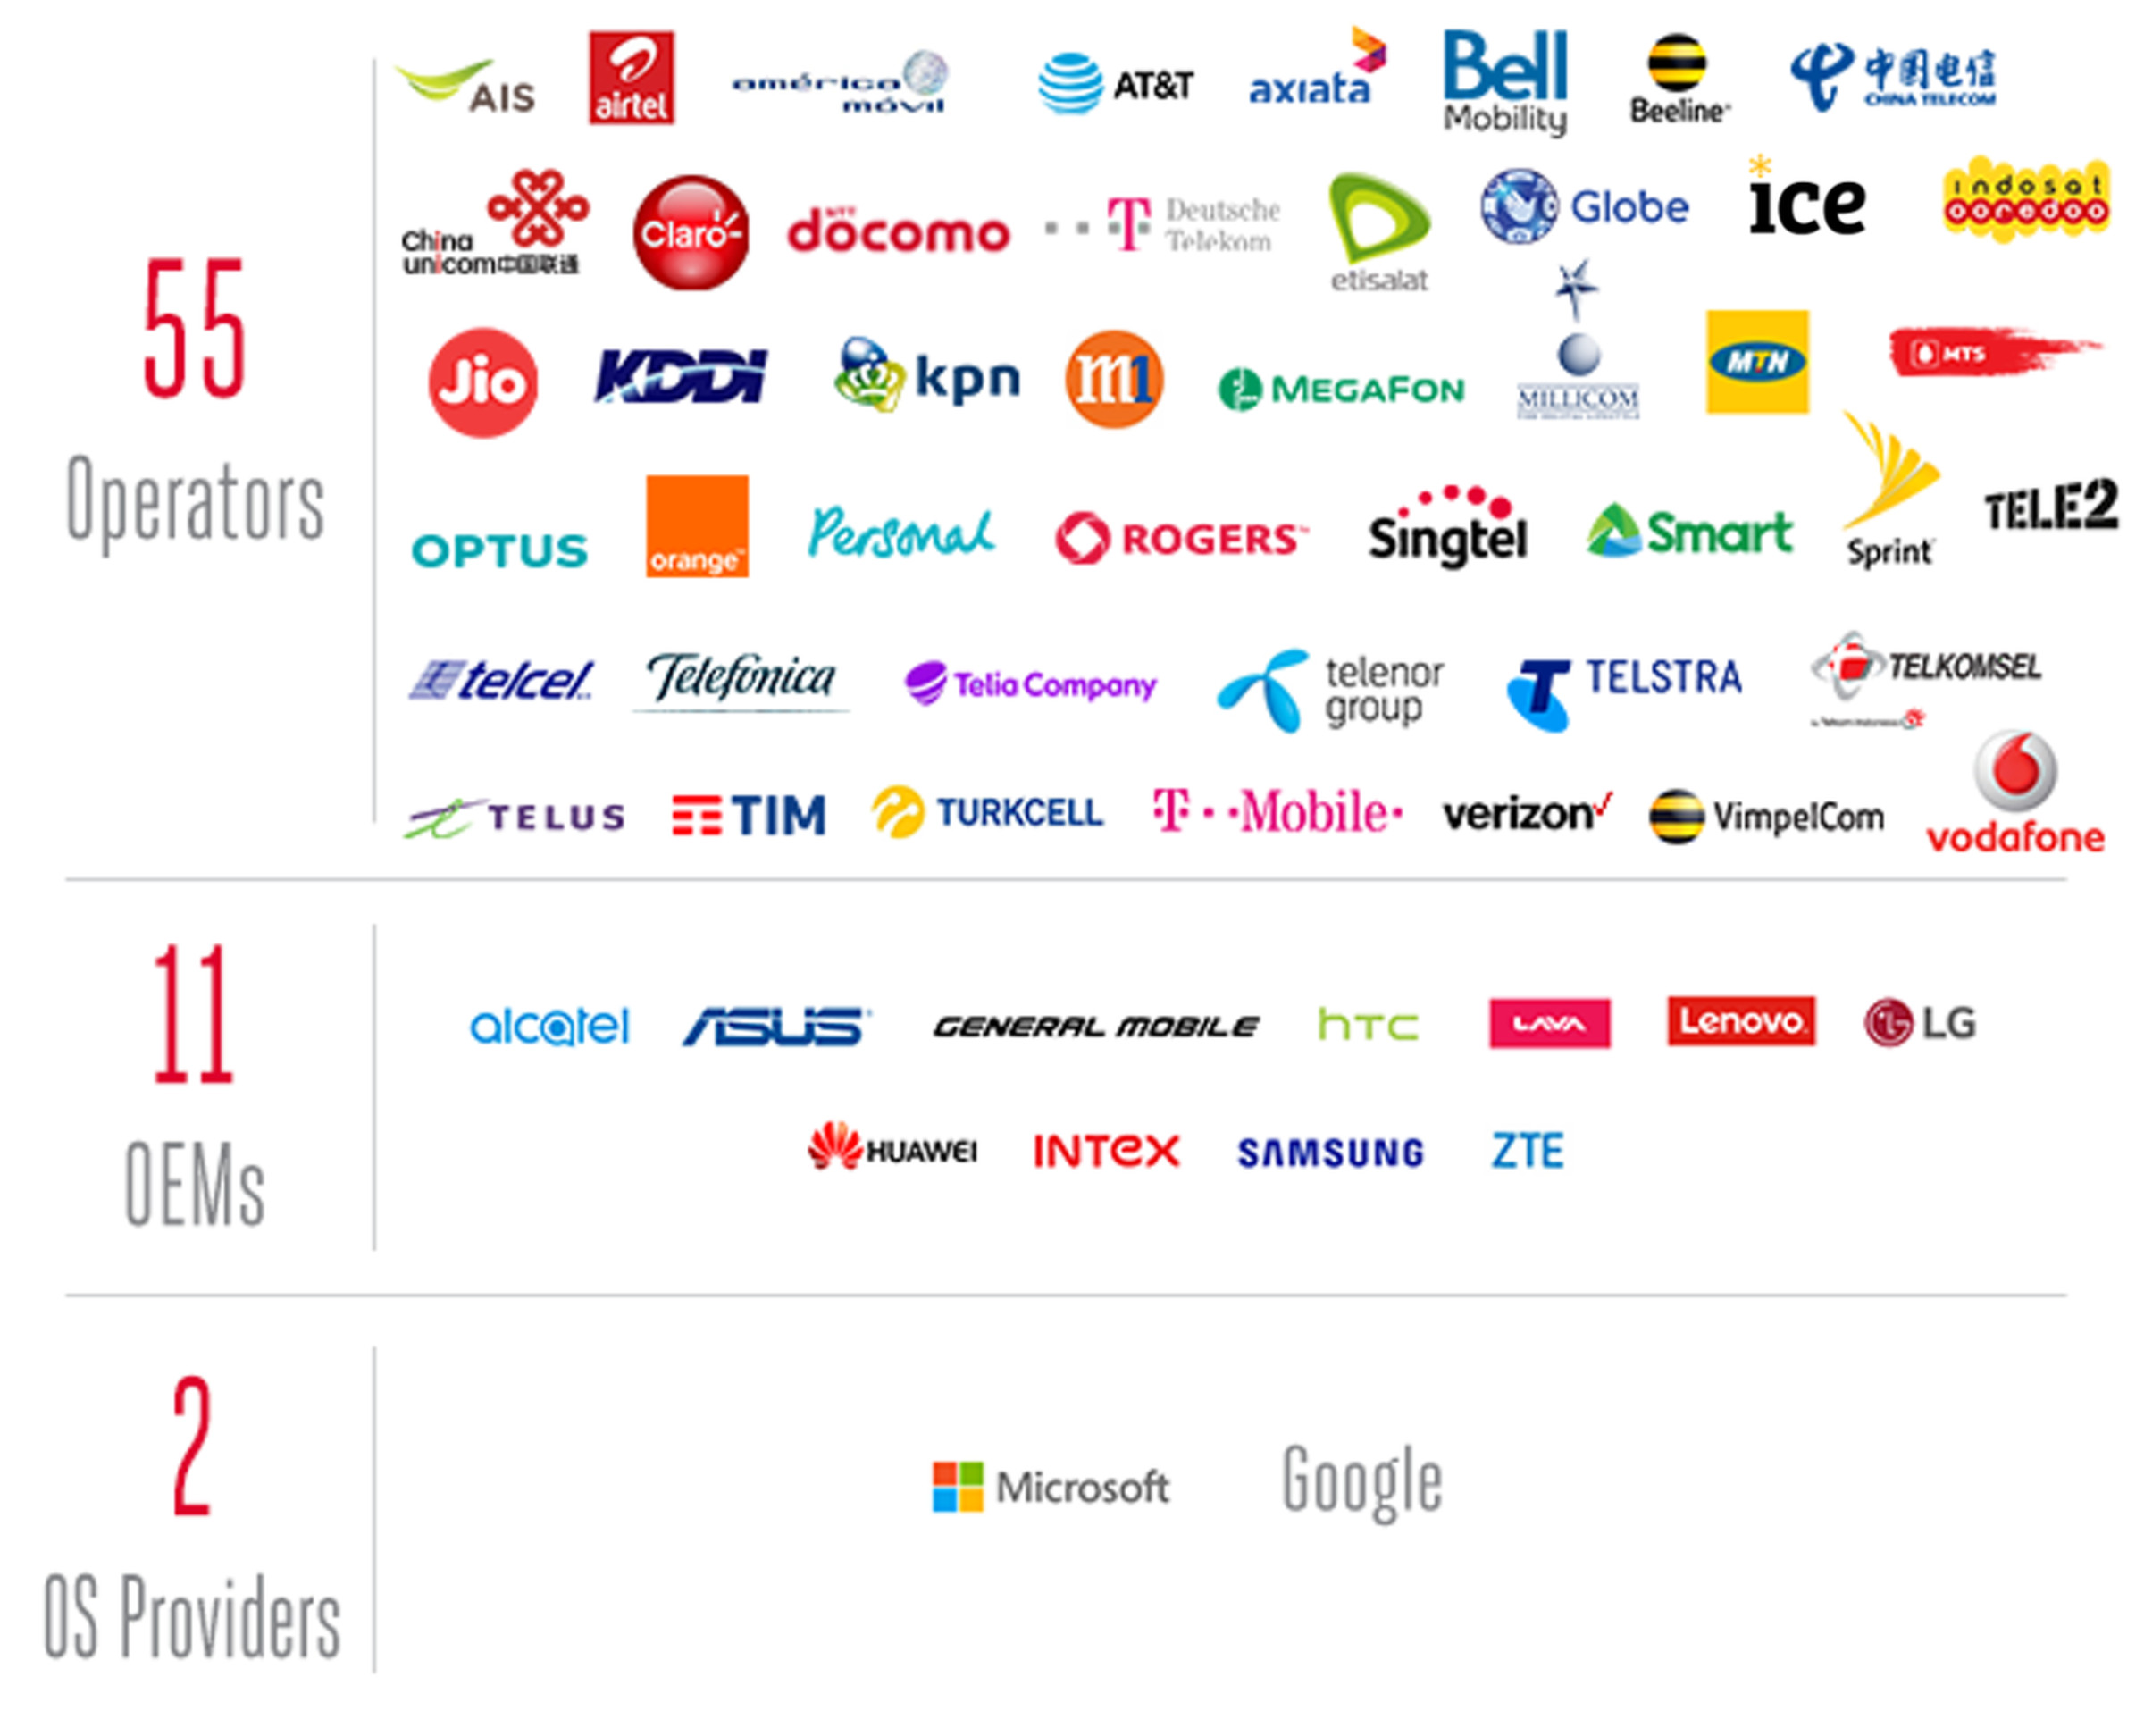 The companies that support the RCS Universal Profile as of April 2018.